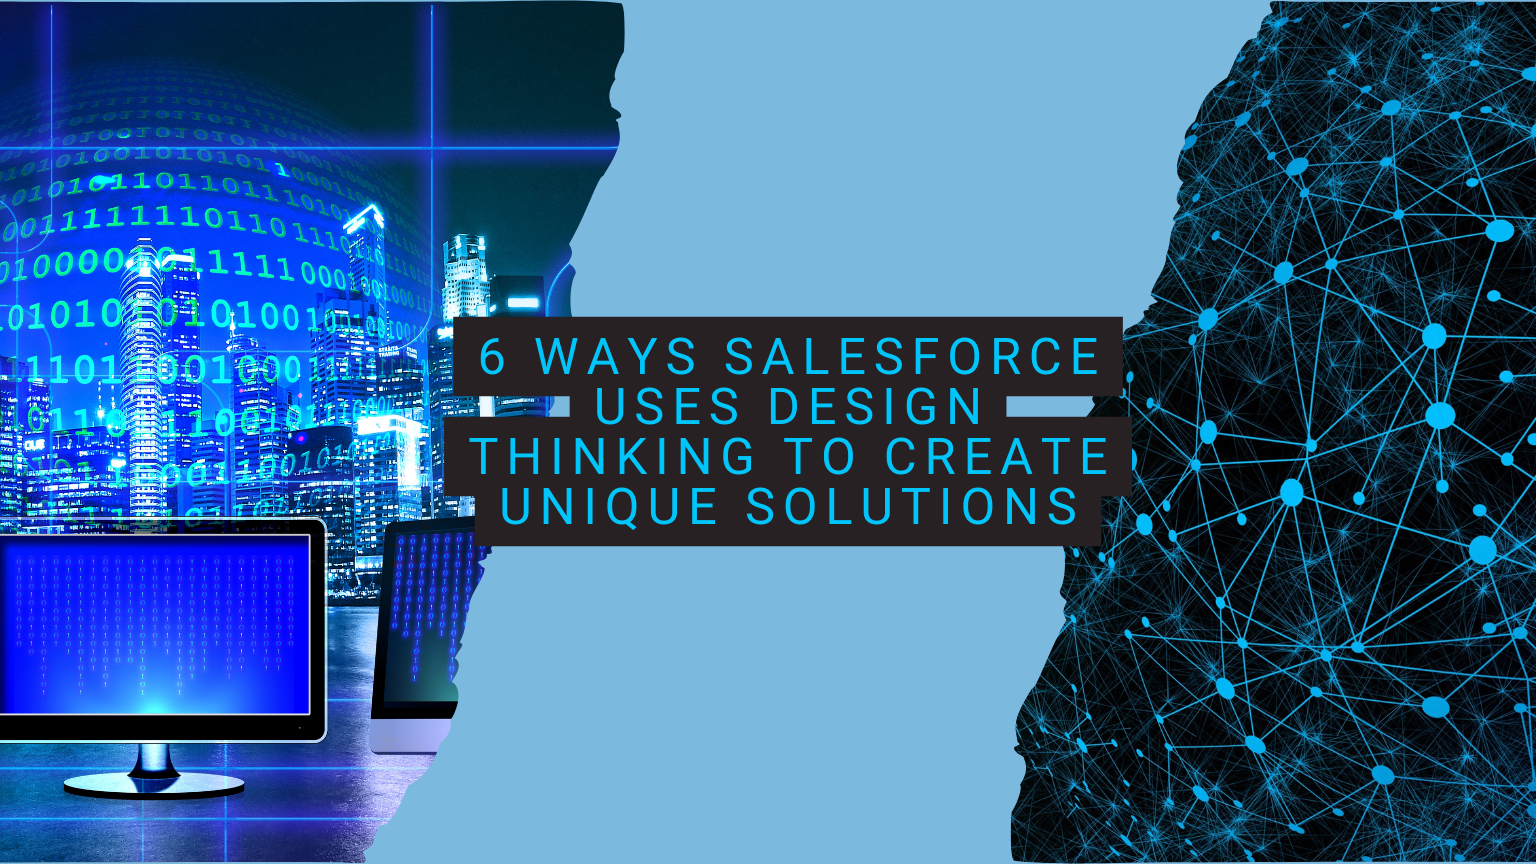 6 Ways Salesforce Uses Design Thinking to Create Unique Solutions